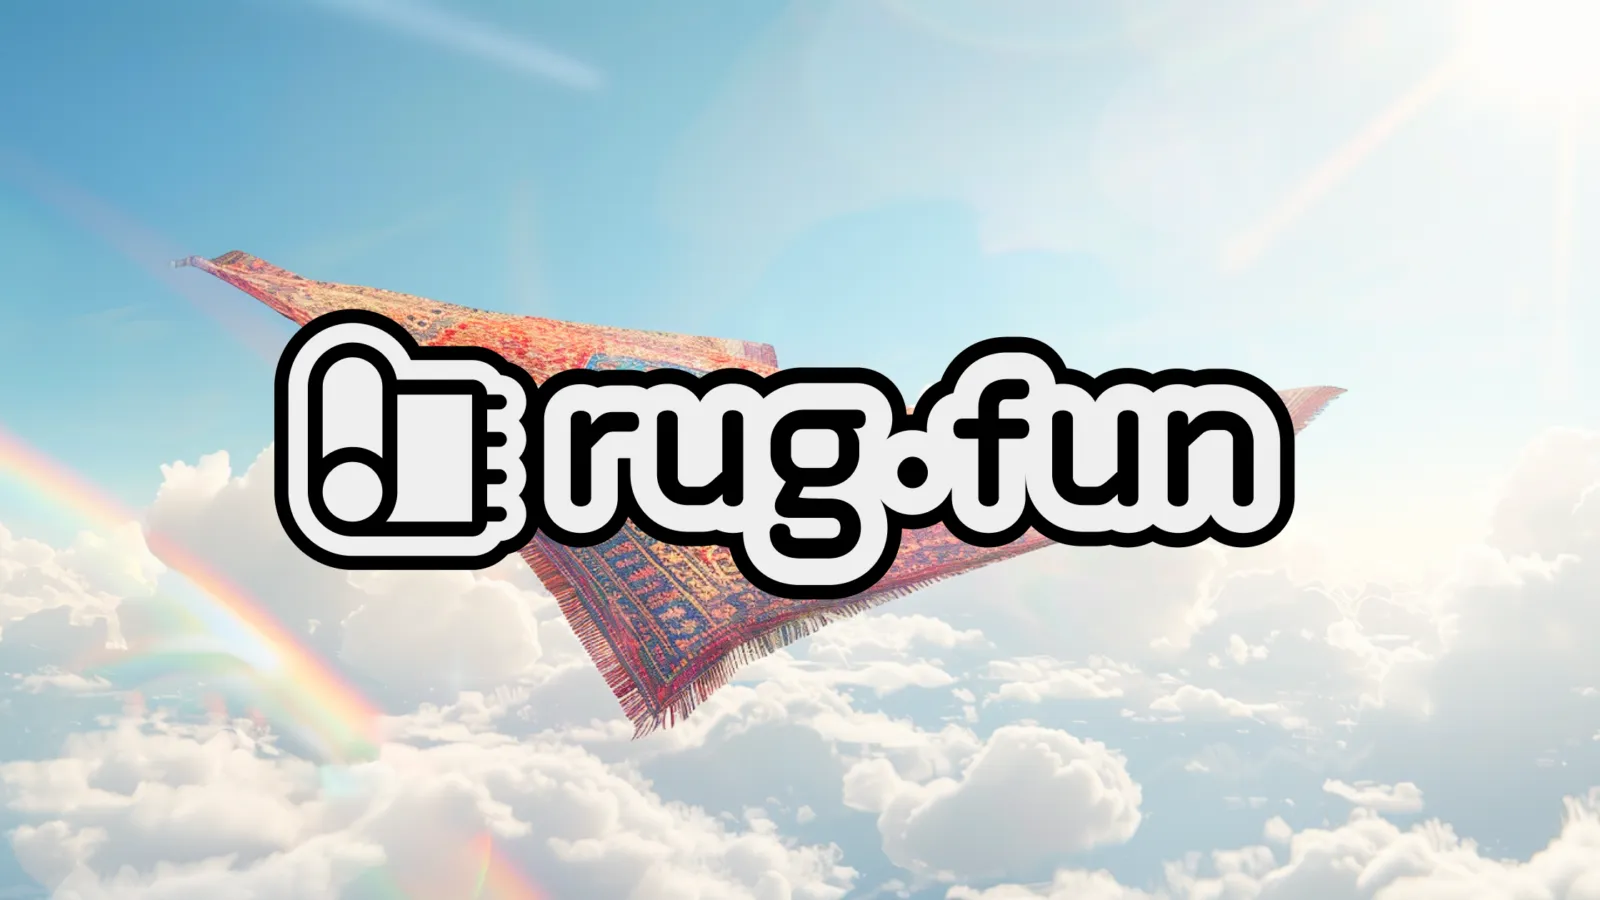 Rug.fun developed a game on Base network that captured attention of investors